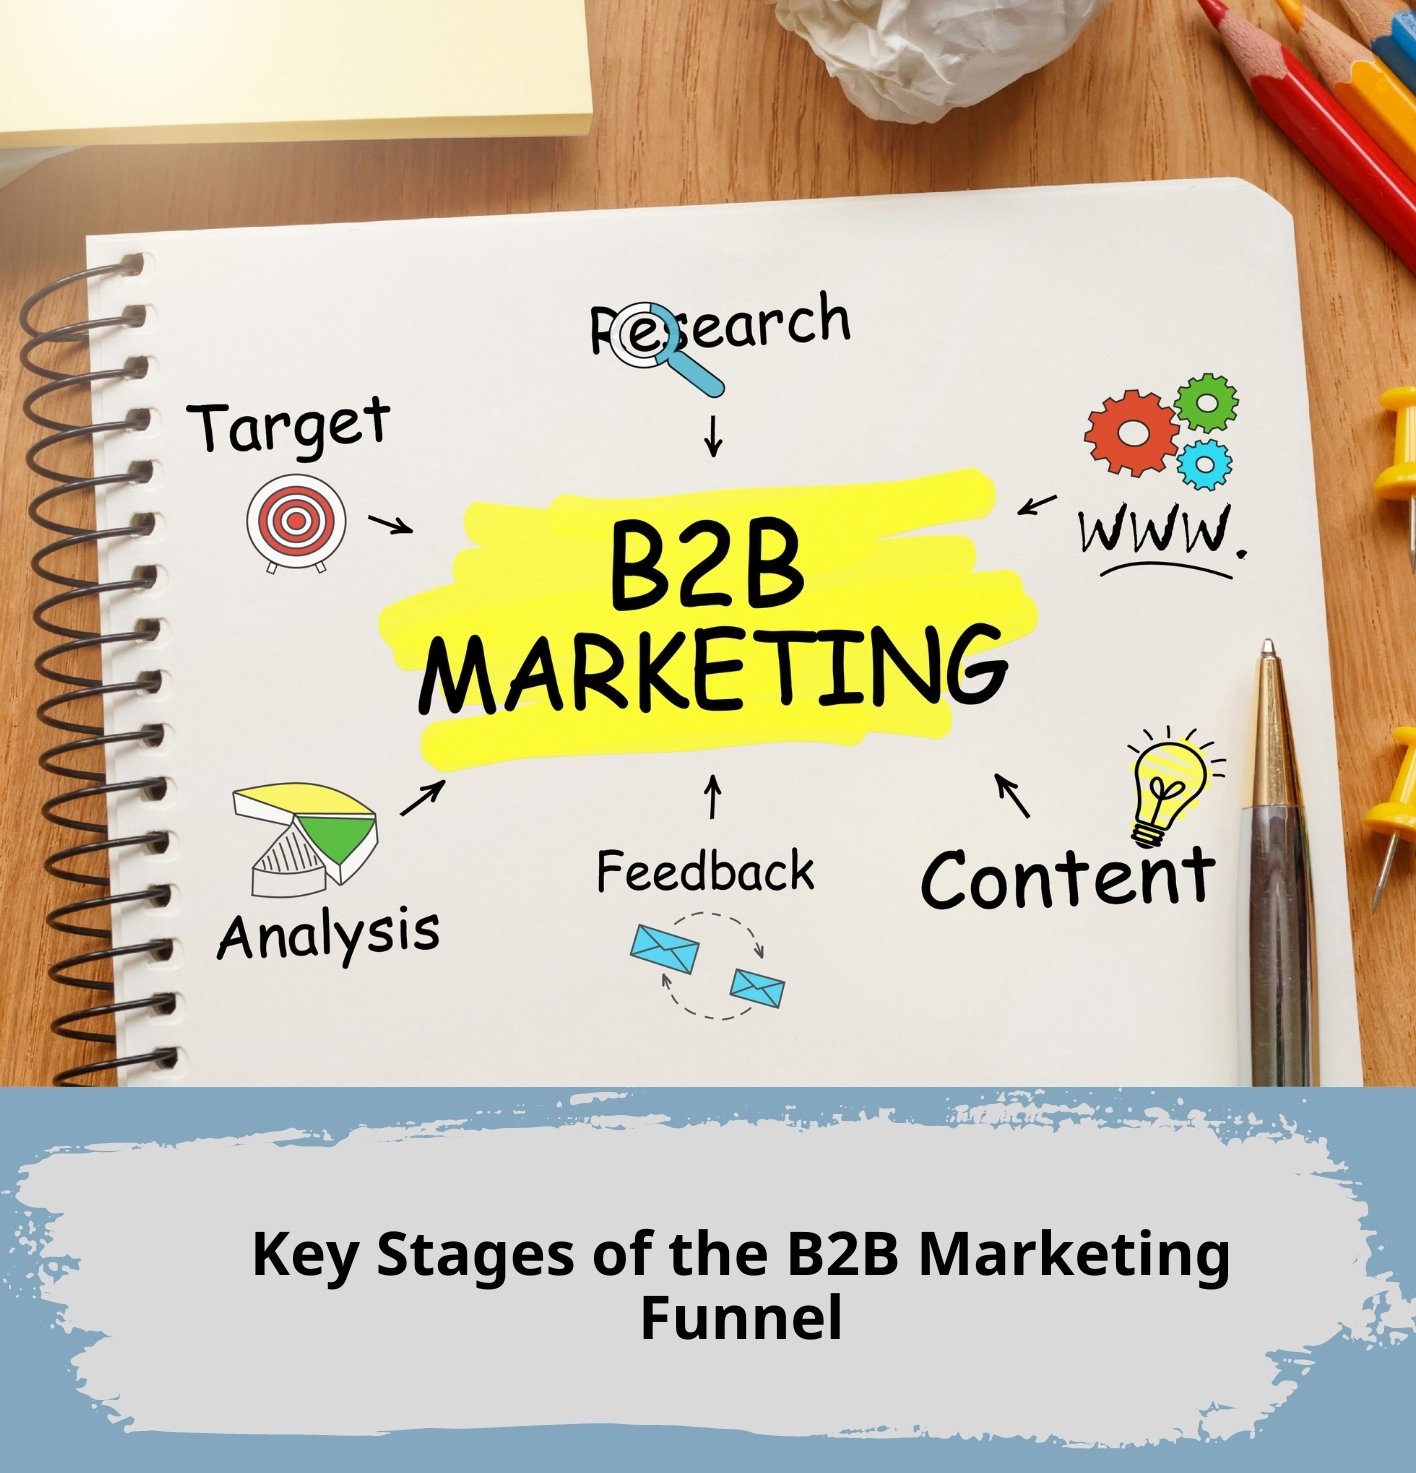 Key Stages of the B2B Marketing Funnel